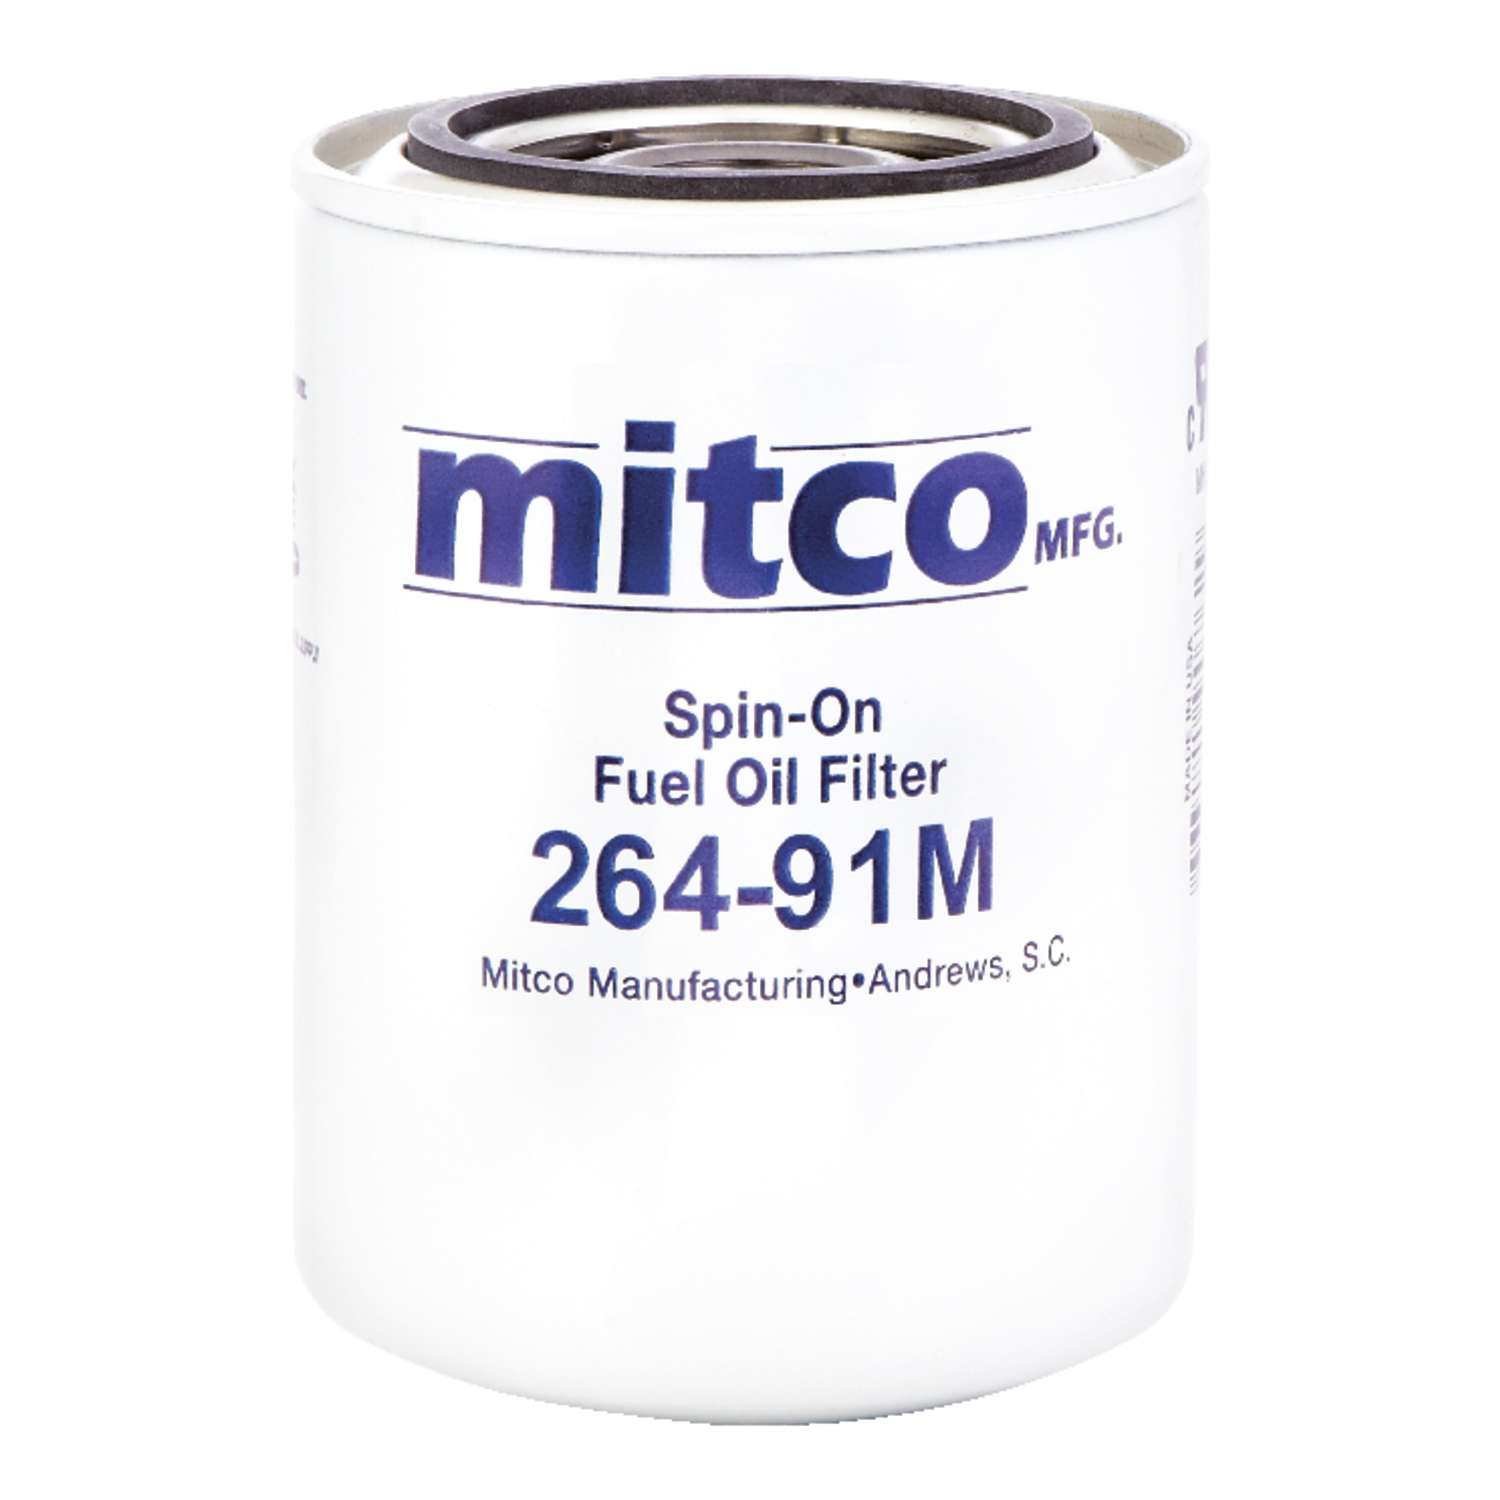 6 NEW MITCO MICRO-FLOW OIL FILTER LOT 250-48M WITH GASKETS